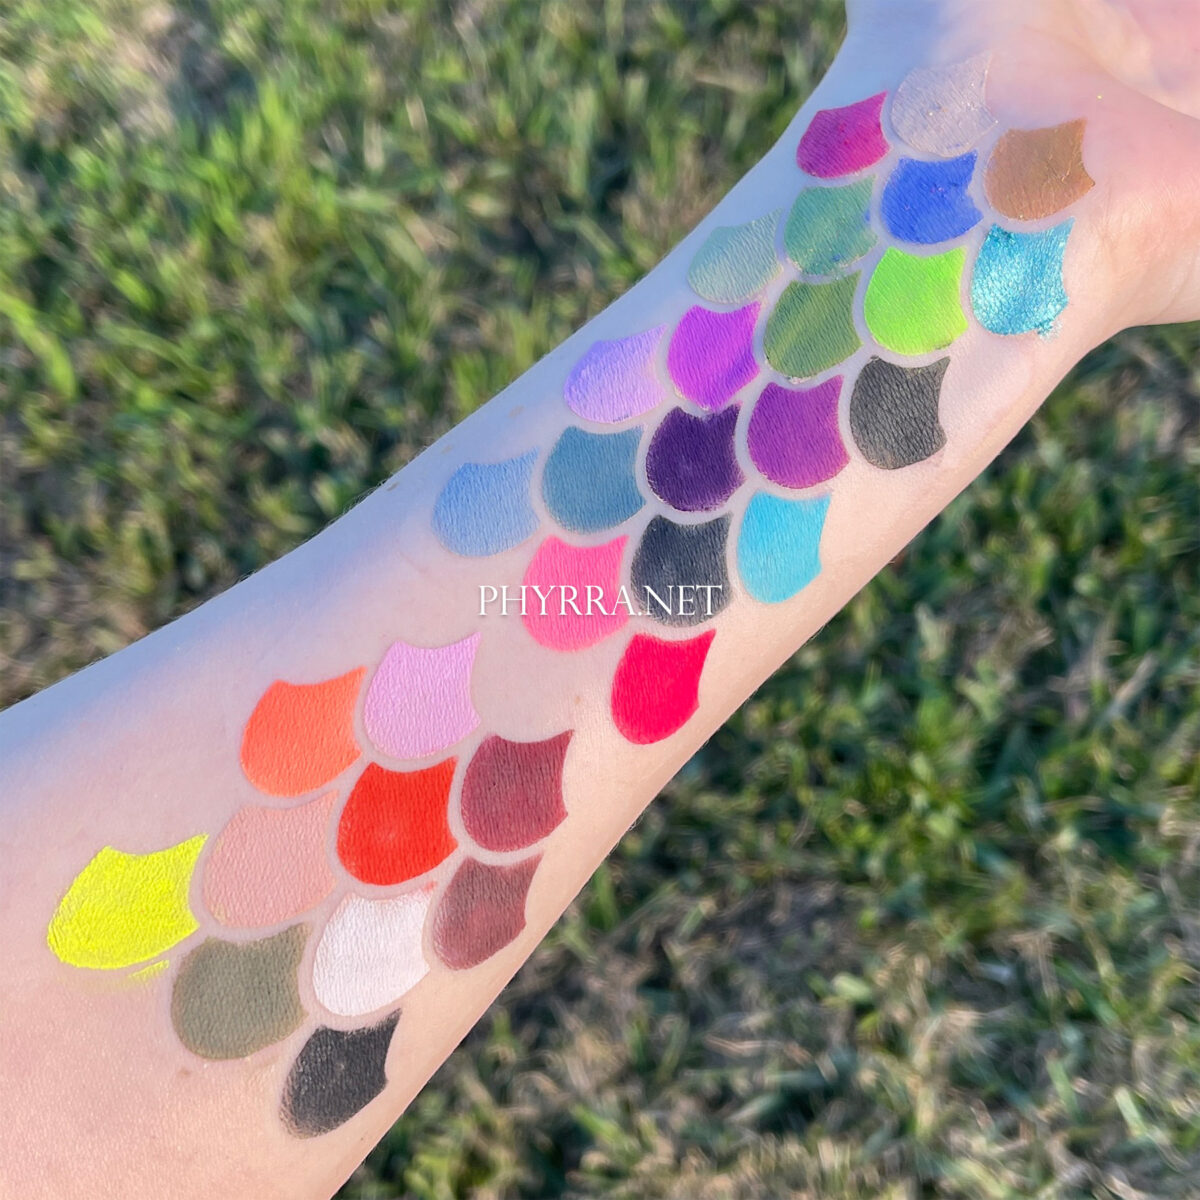 Blend Bunny Surge Palette swatches on fair skin in direct sun